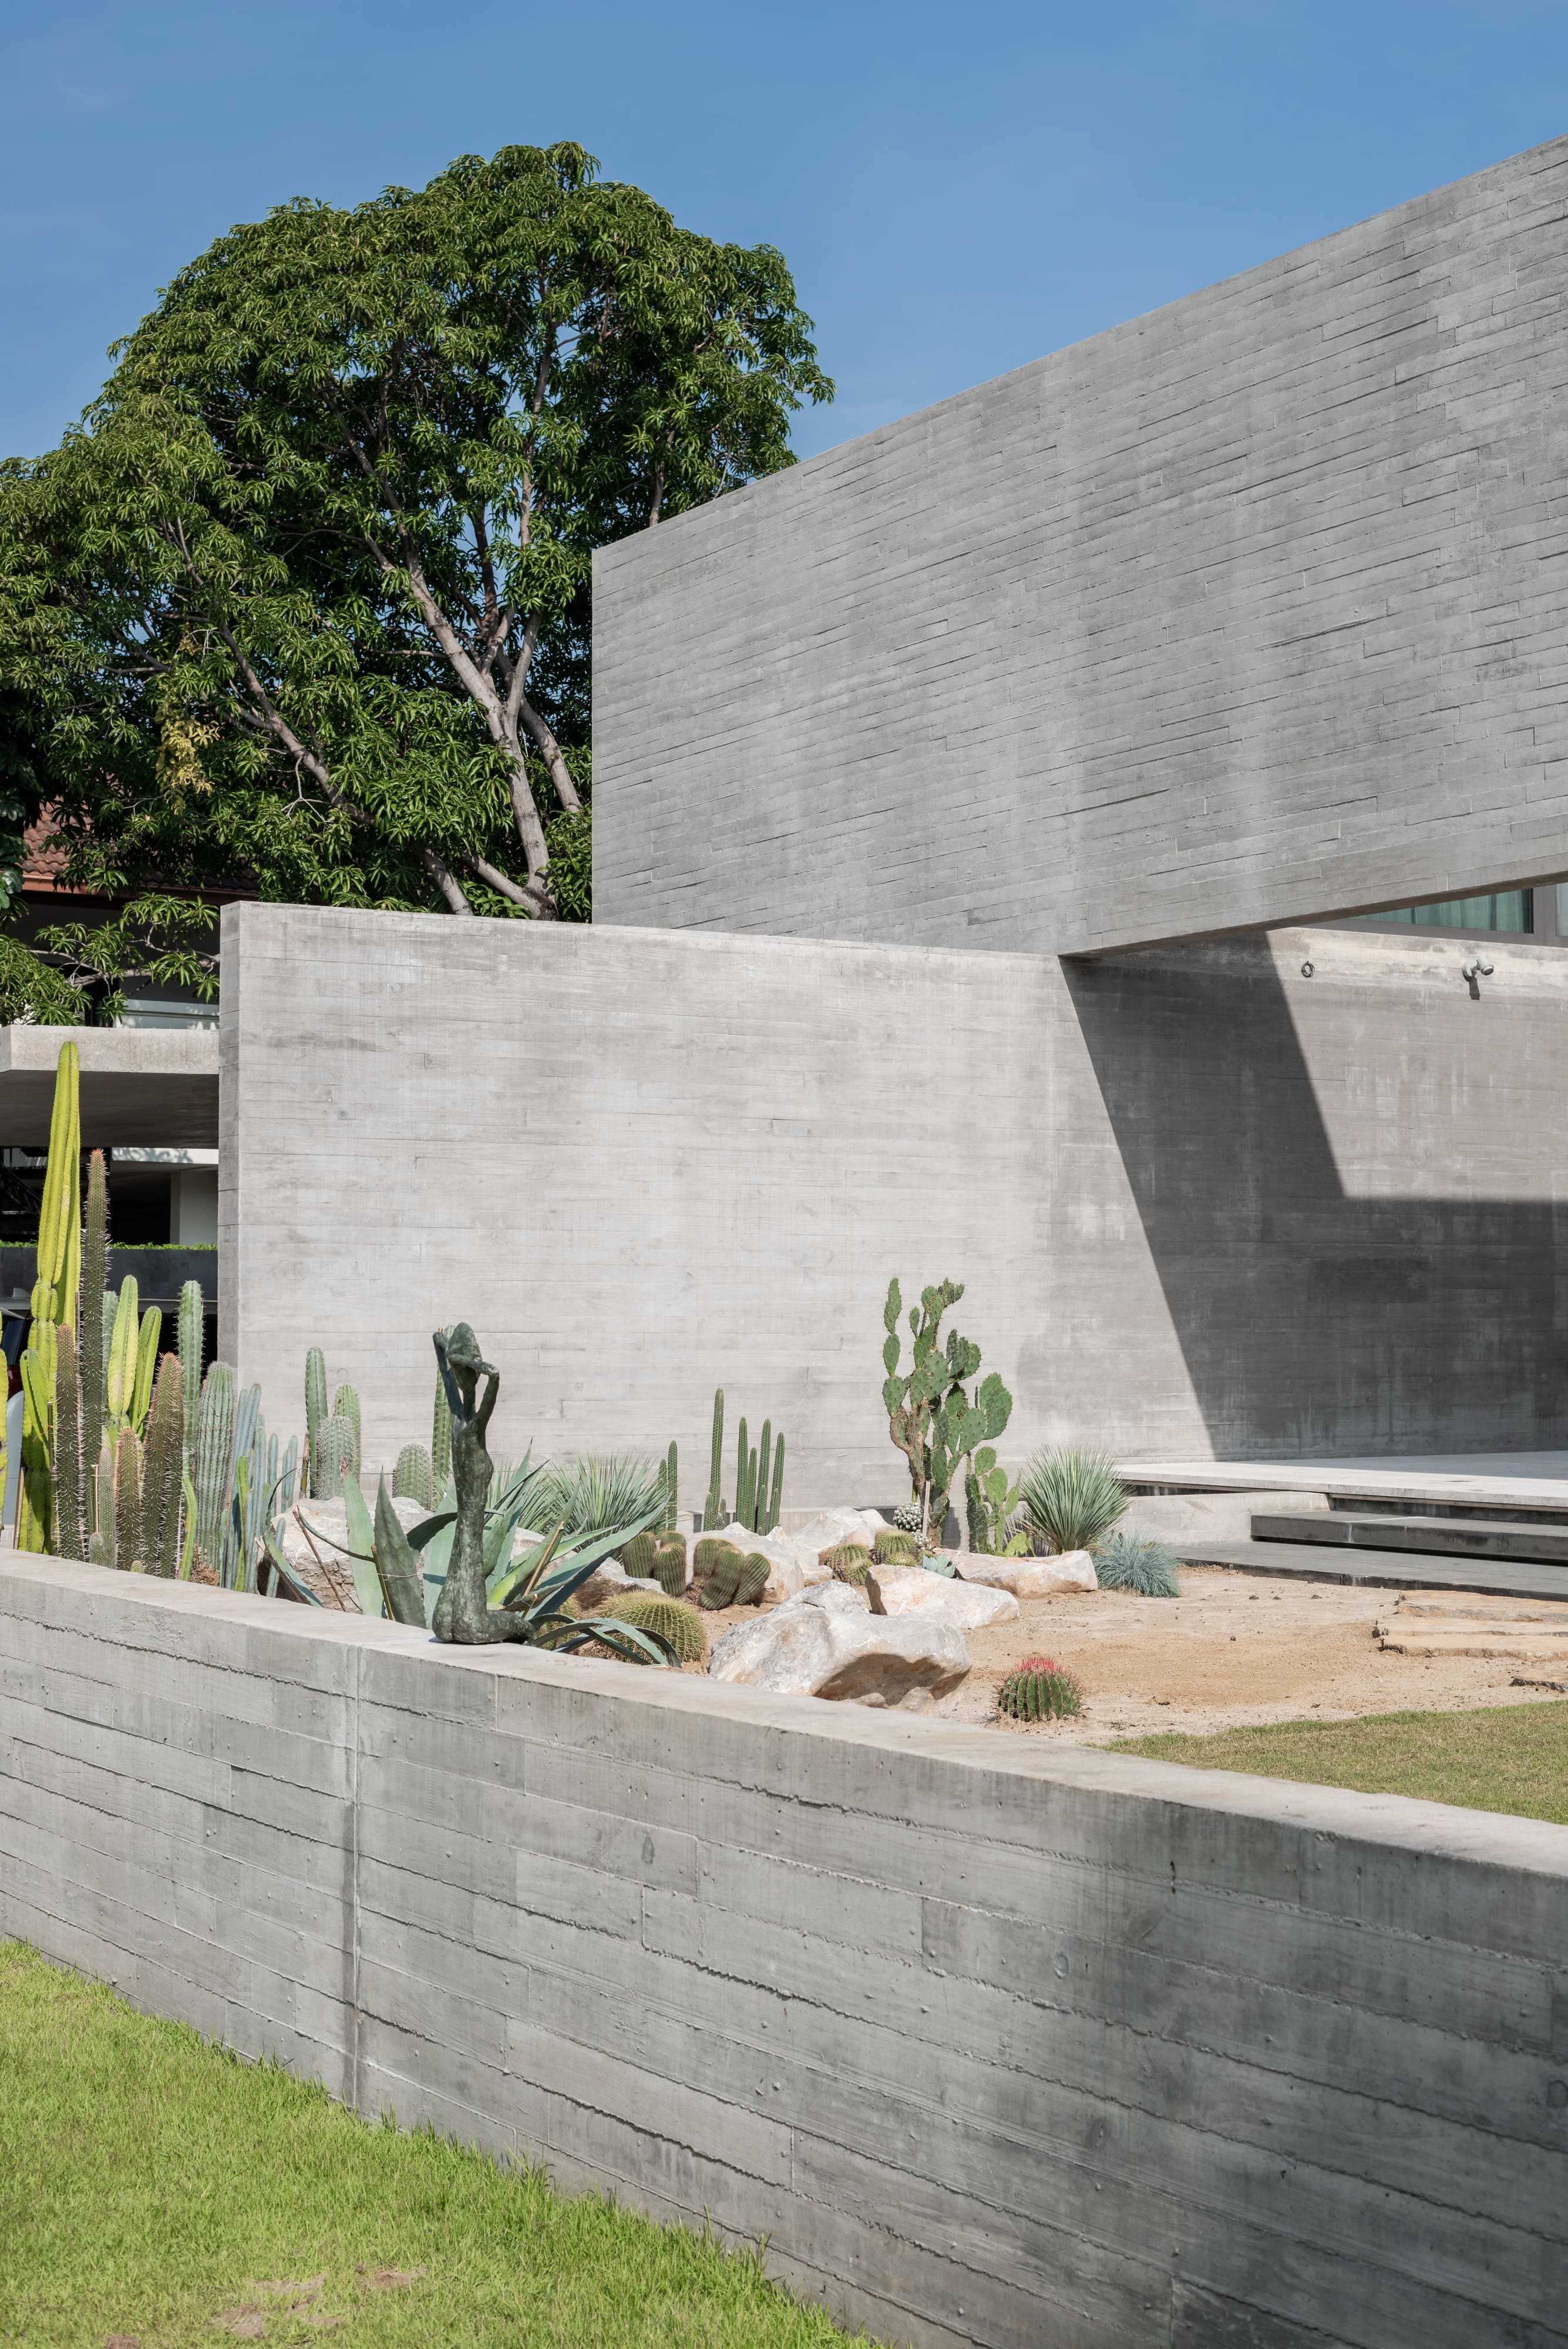 Each concrete plane intersects to form the spaces of the house and supports the main structural system